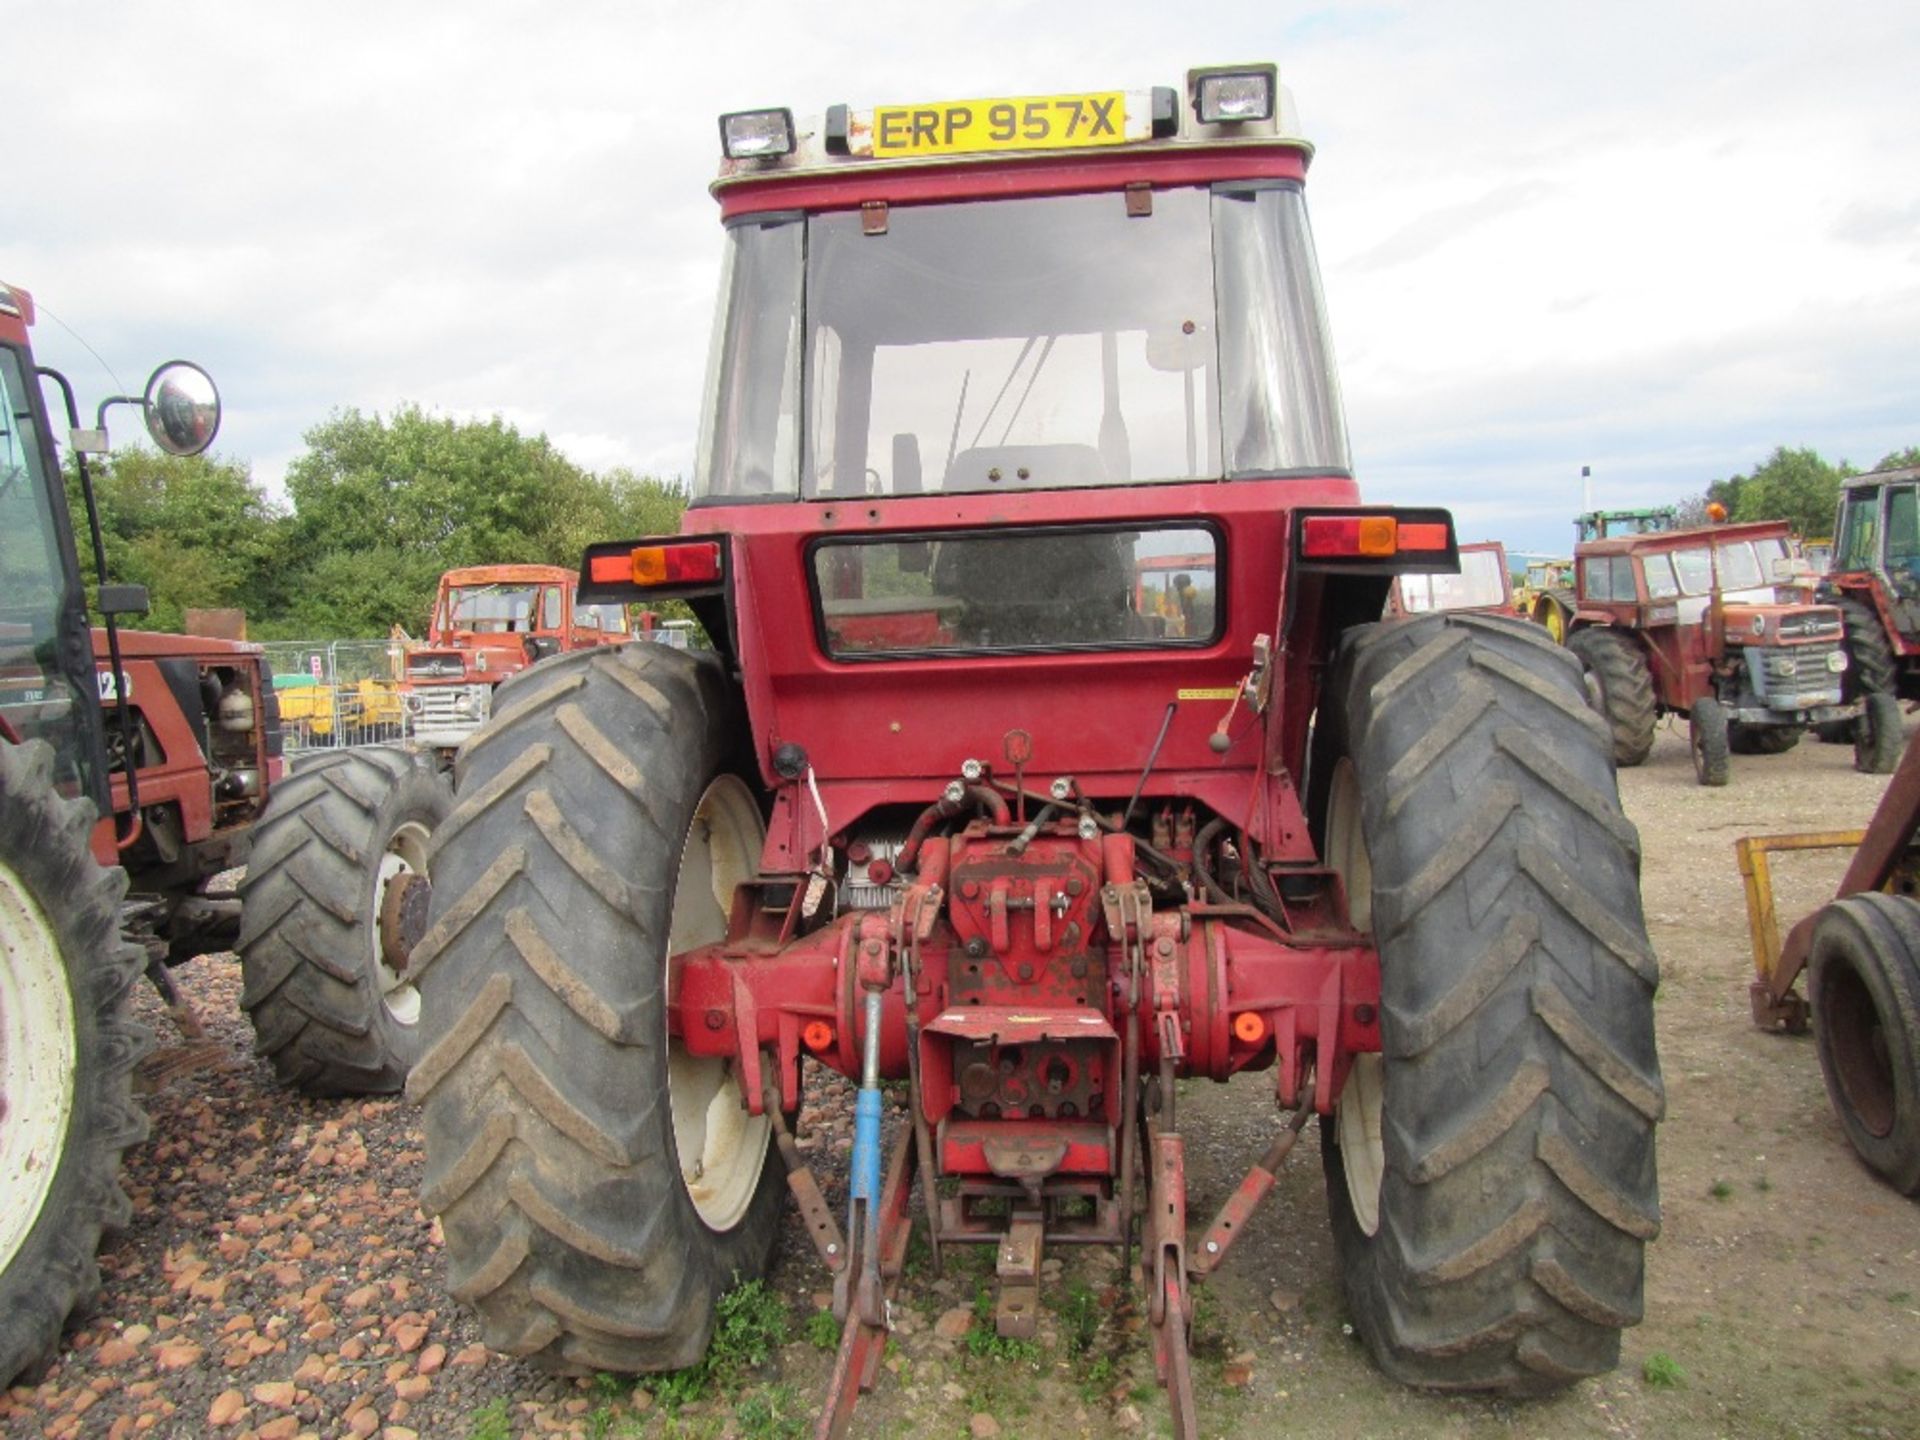 International 955XL 2wd Tractor. V5 will be supplied. Reg. No. ERP 957X Ser. No. 001289 - Image 4 of 4